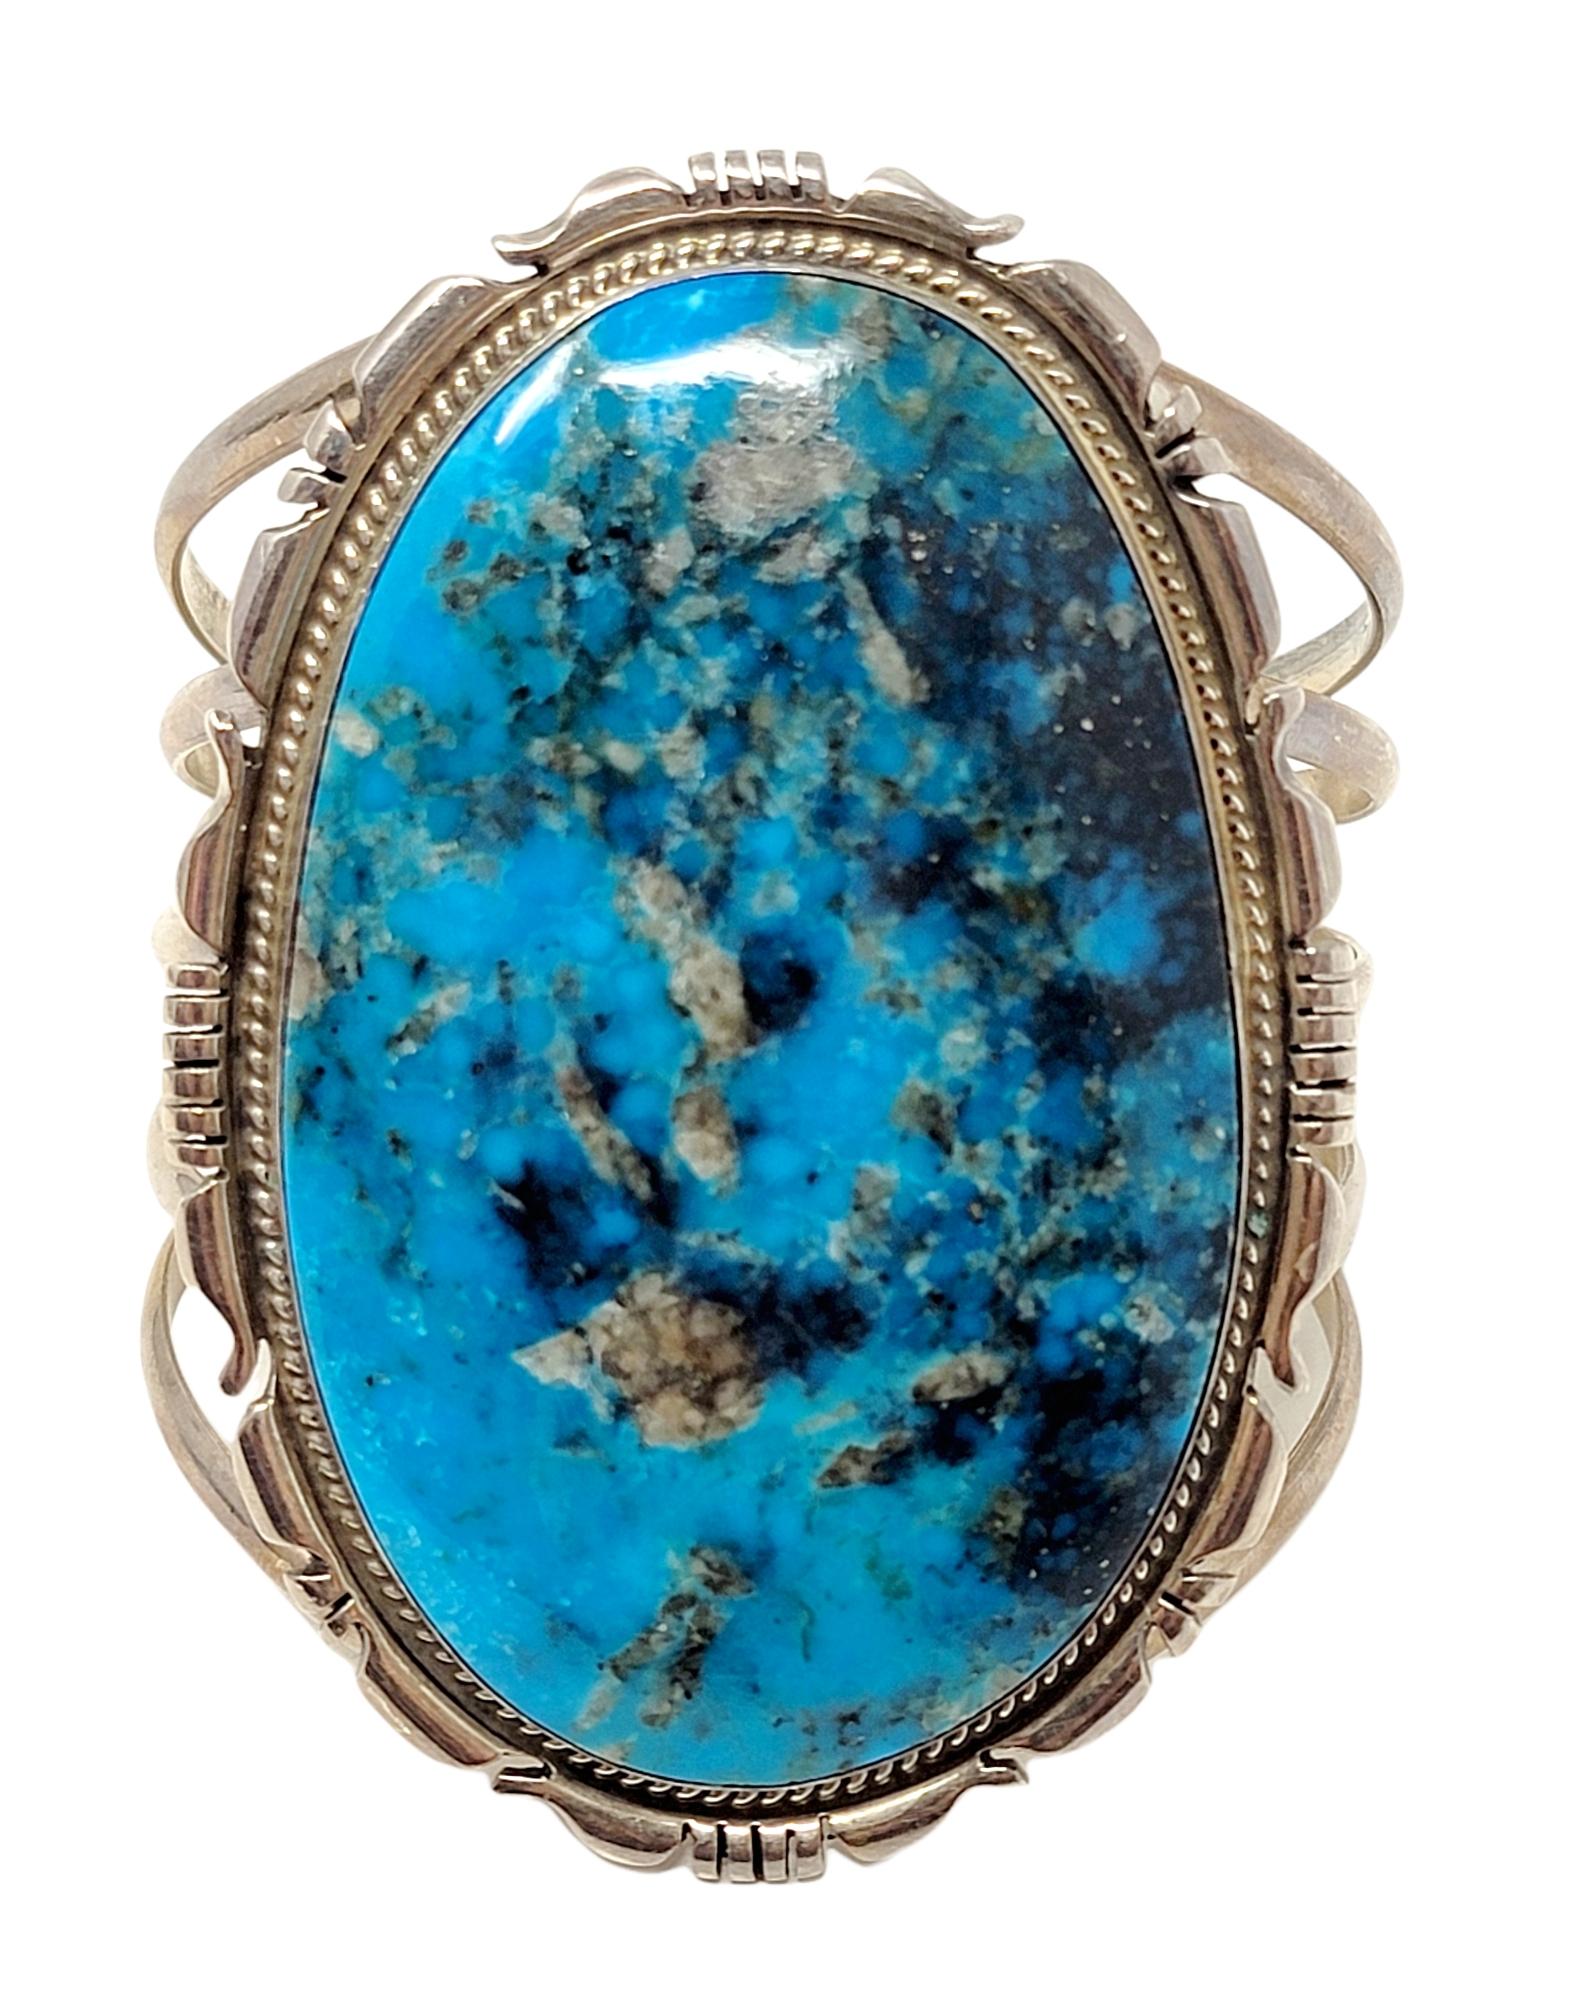 Huge sterling silver and natural turquoise cuff bracelet with exquisite fine details. Handmade by Native American artist Jon McCray. 

Bracelet type: Cuff
Metal: Sterling Silver
Natural Turquoise: Cabochon
Weight: 106.5 grams
Width: 3